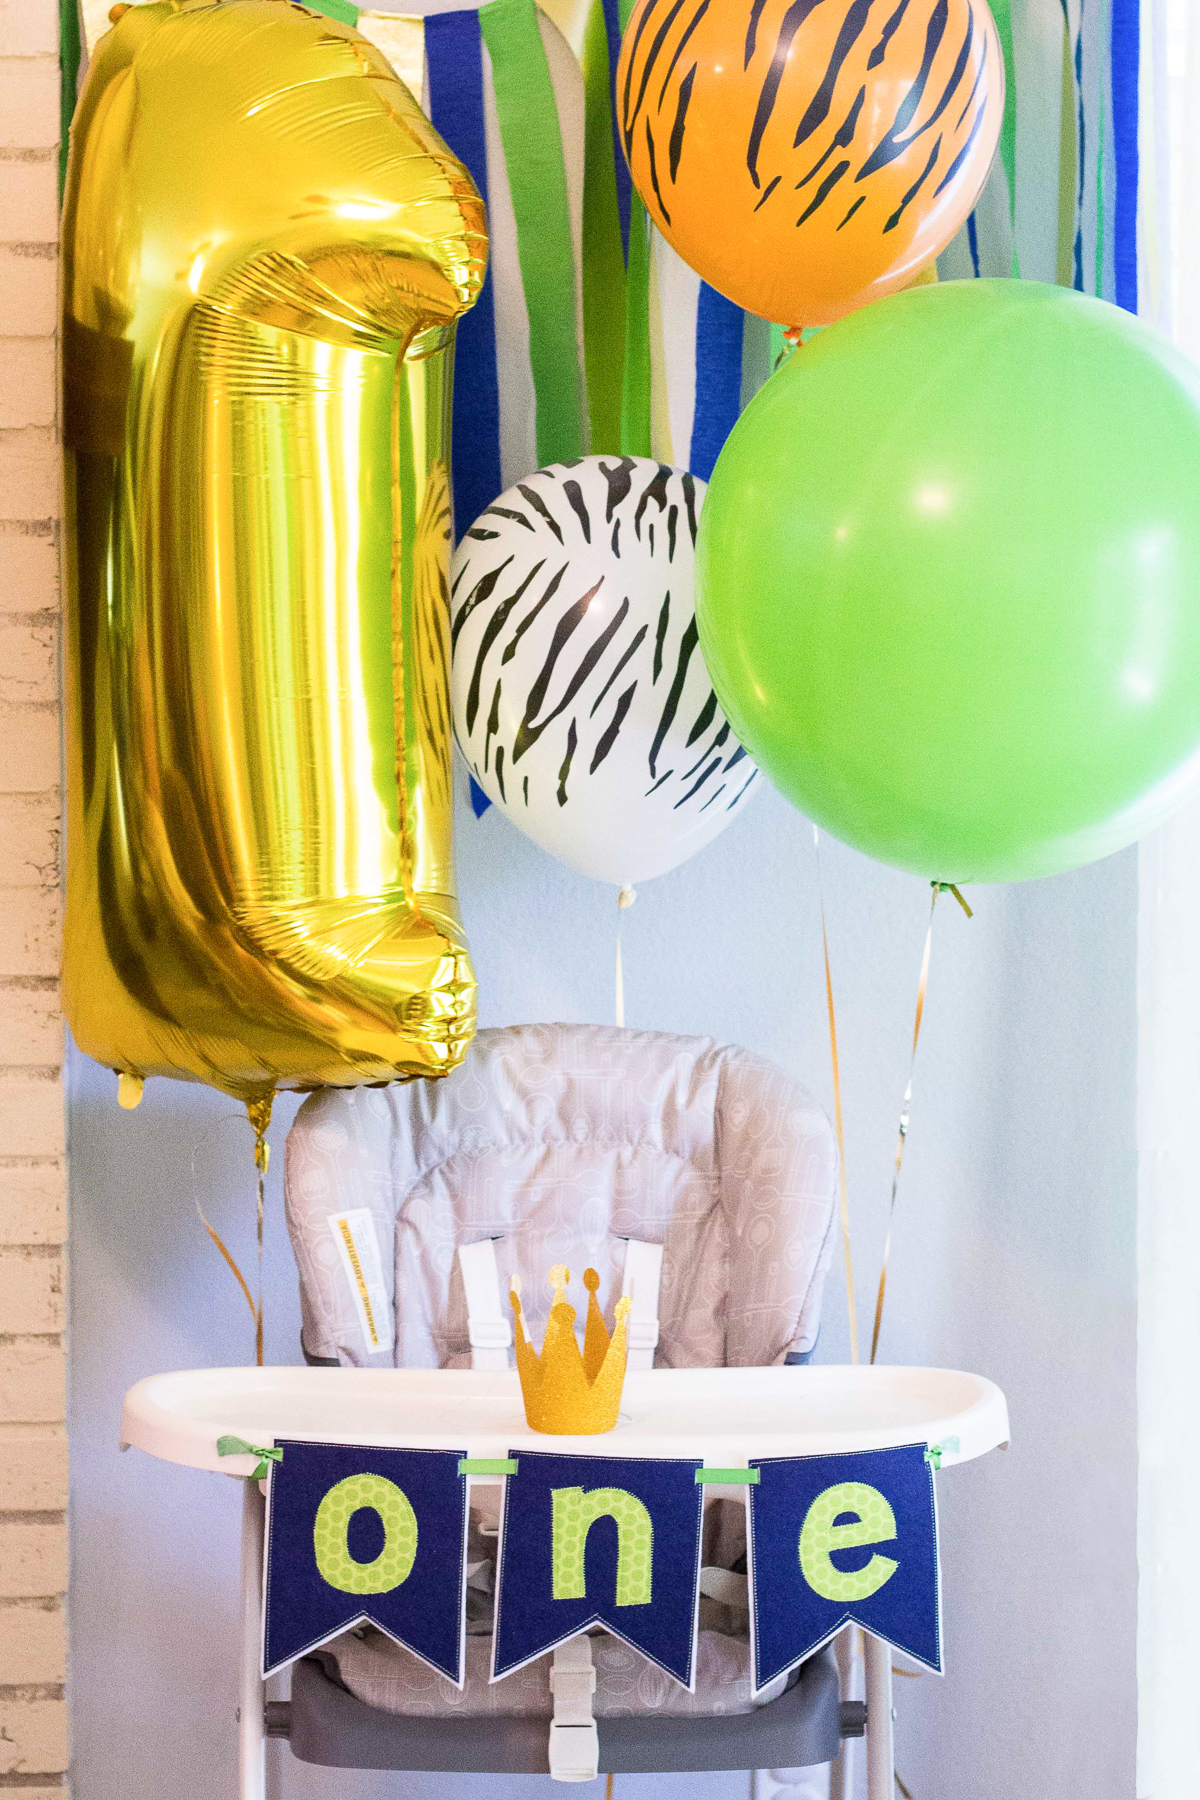 Wild One 1st birthday food ideas and party decorations, balloons, Alyssa Ashmore of Passionate Portions